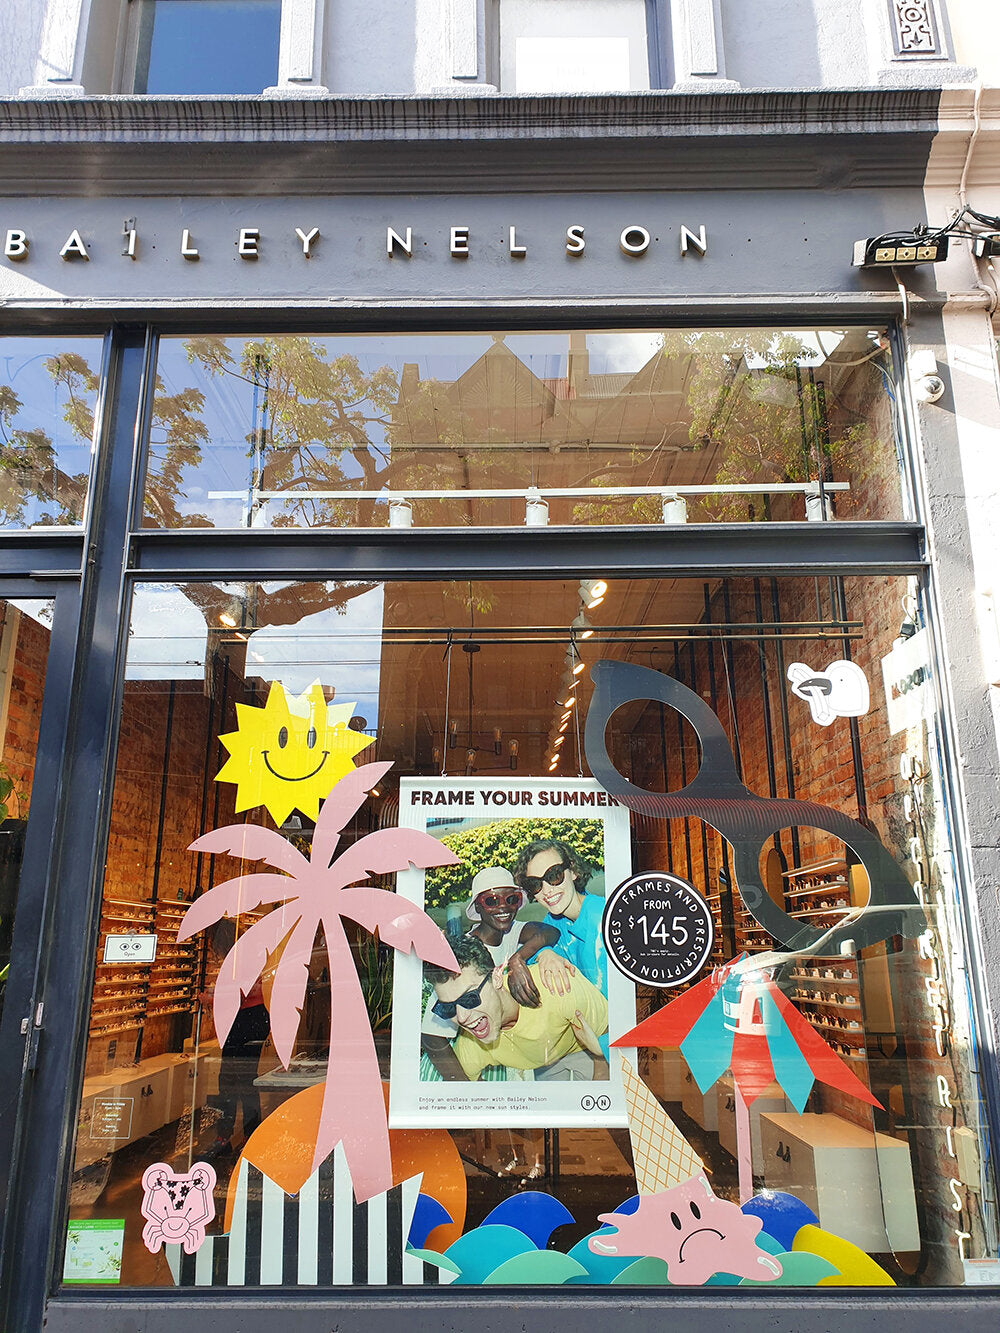 A colourful installation of cut-out shapes decorates. Bailey Nelson retail store window. The  window props include a giant pair of eyeglasses, stripy beach umbrella, sun with smiley face, black and white striped starburst shape, melted ice cream with sad 